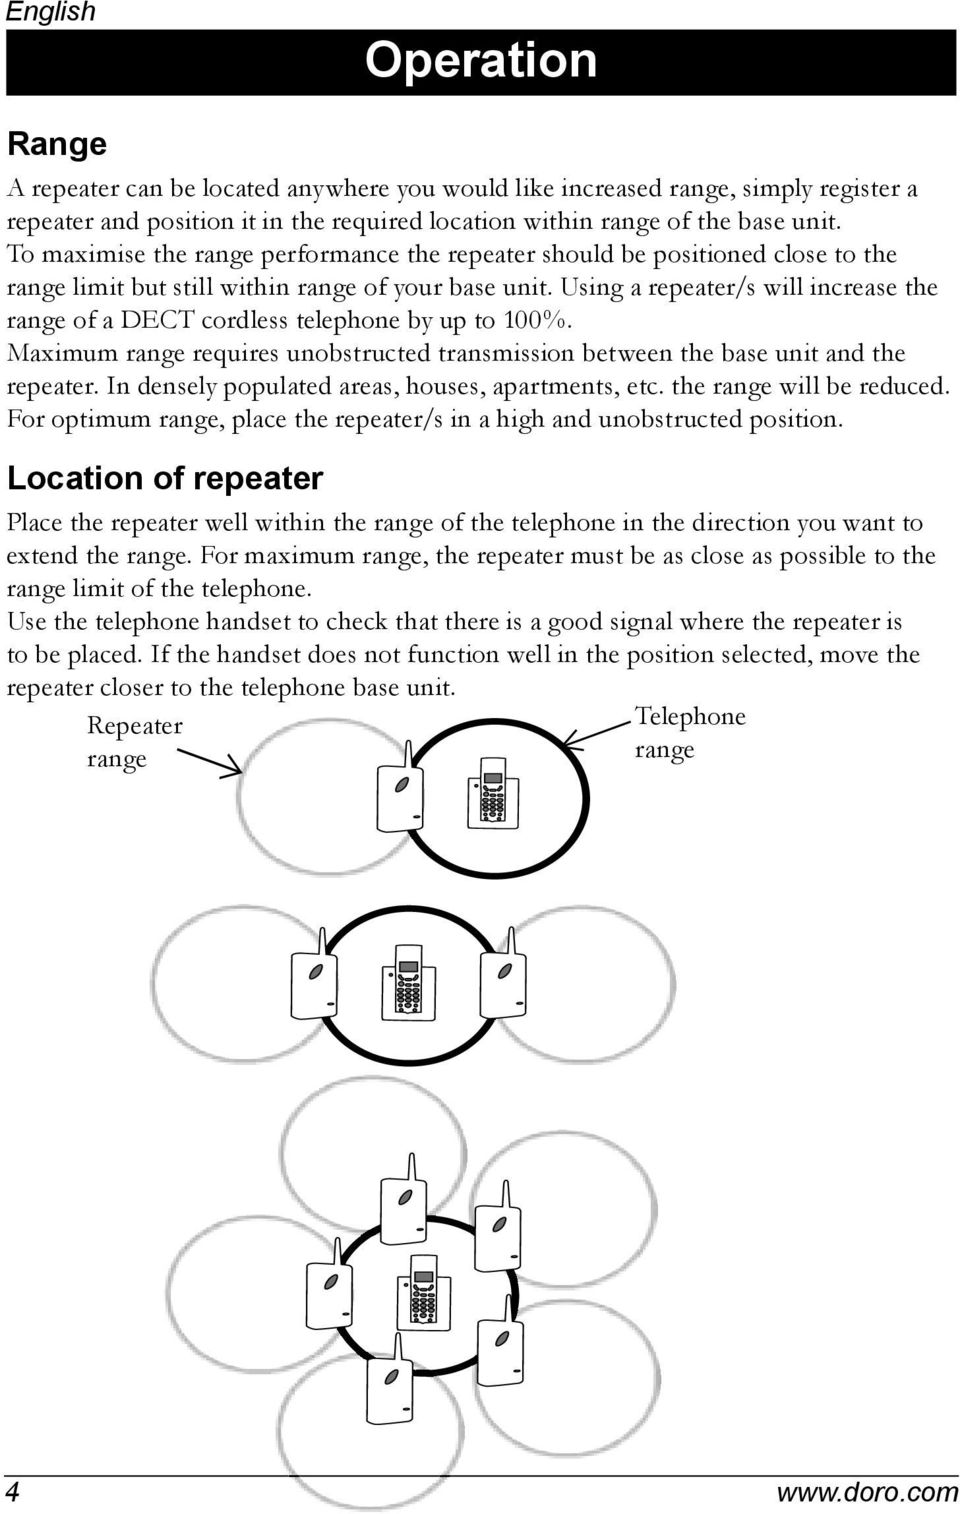 Using a repeater/s will increase the range of a DECT cordless telephone by up to 100%. Maximum range requires unobstructed transmission between the base unit and the repeater.